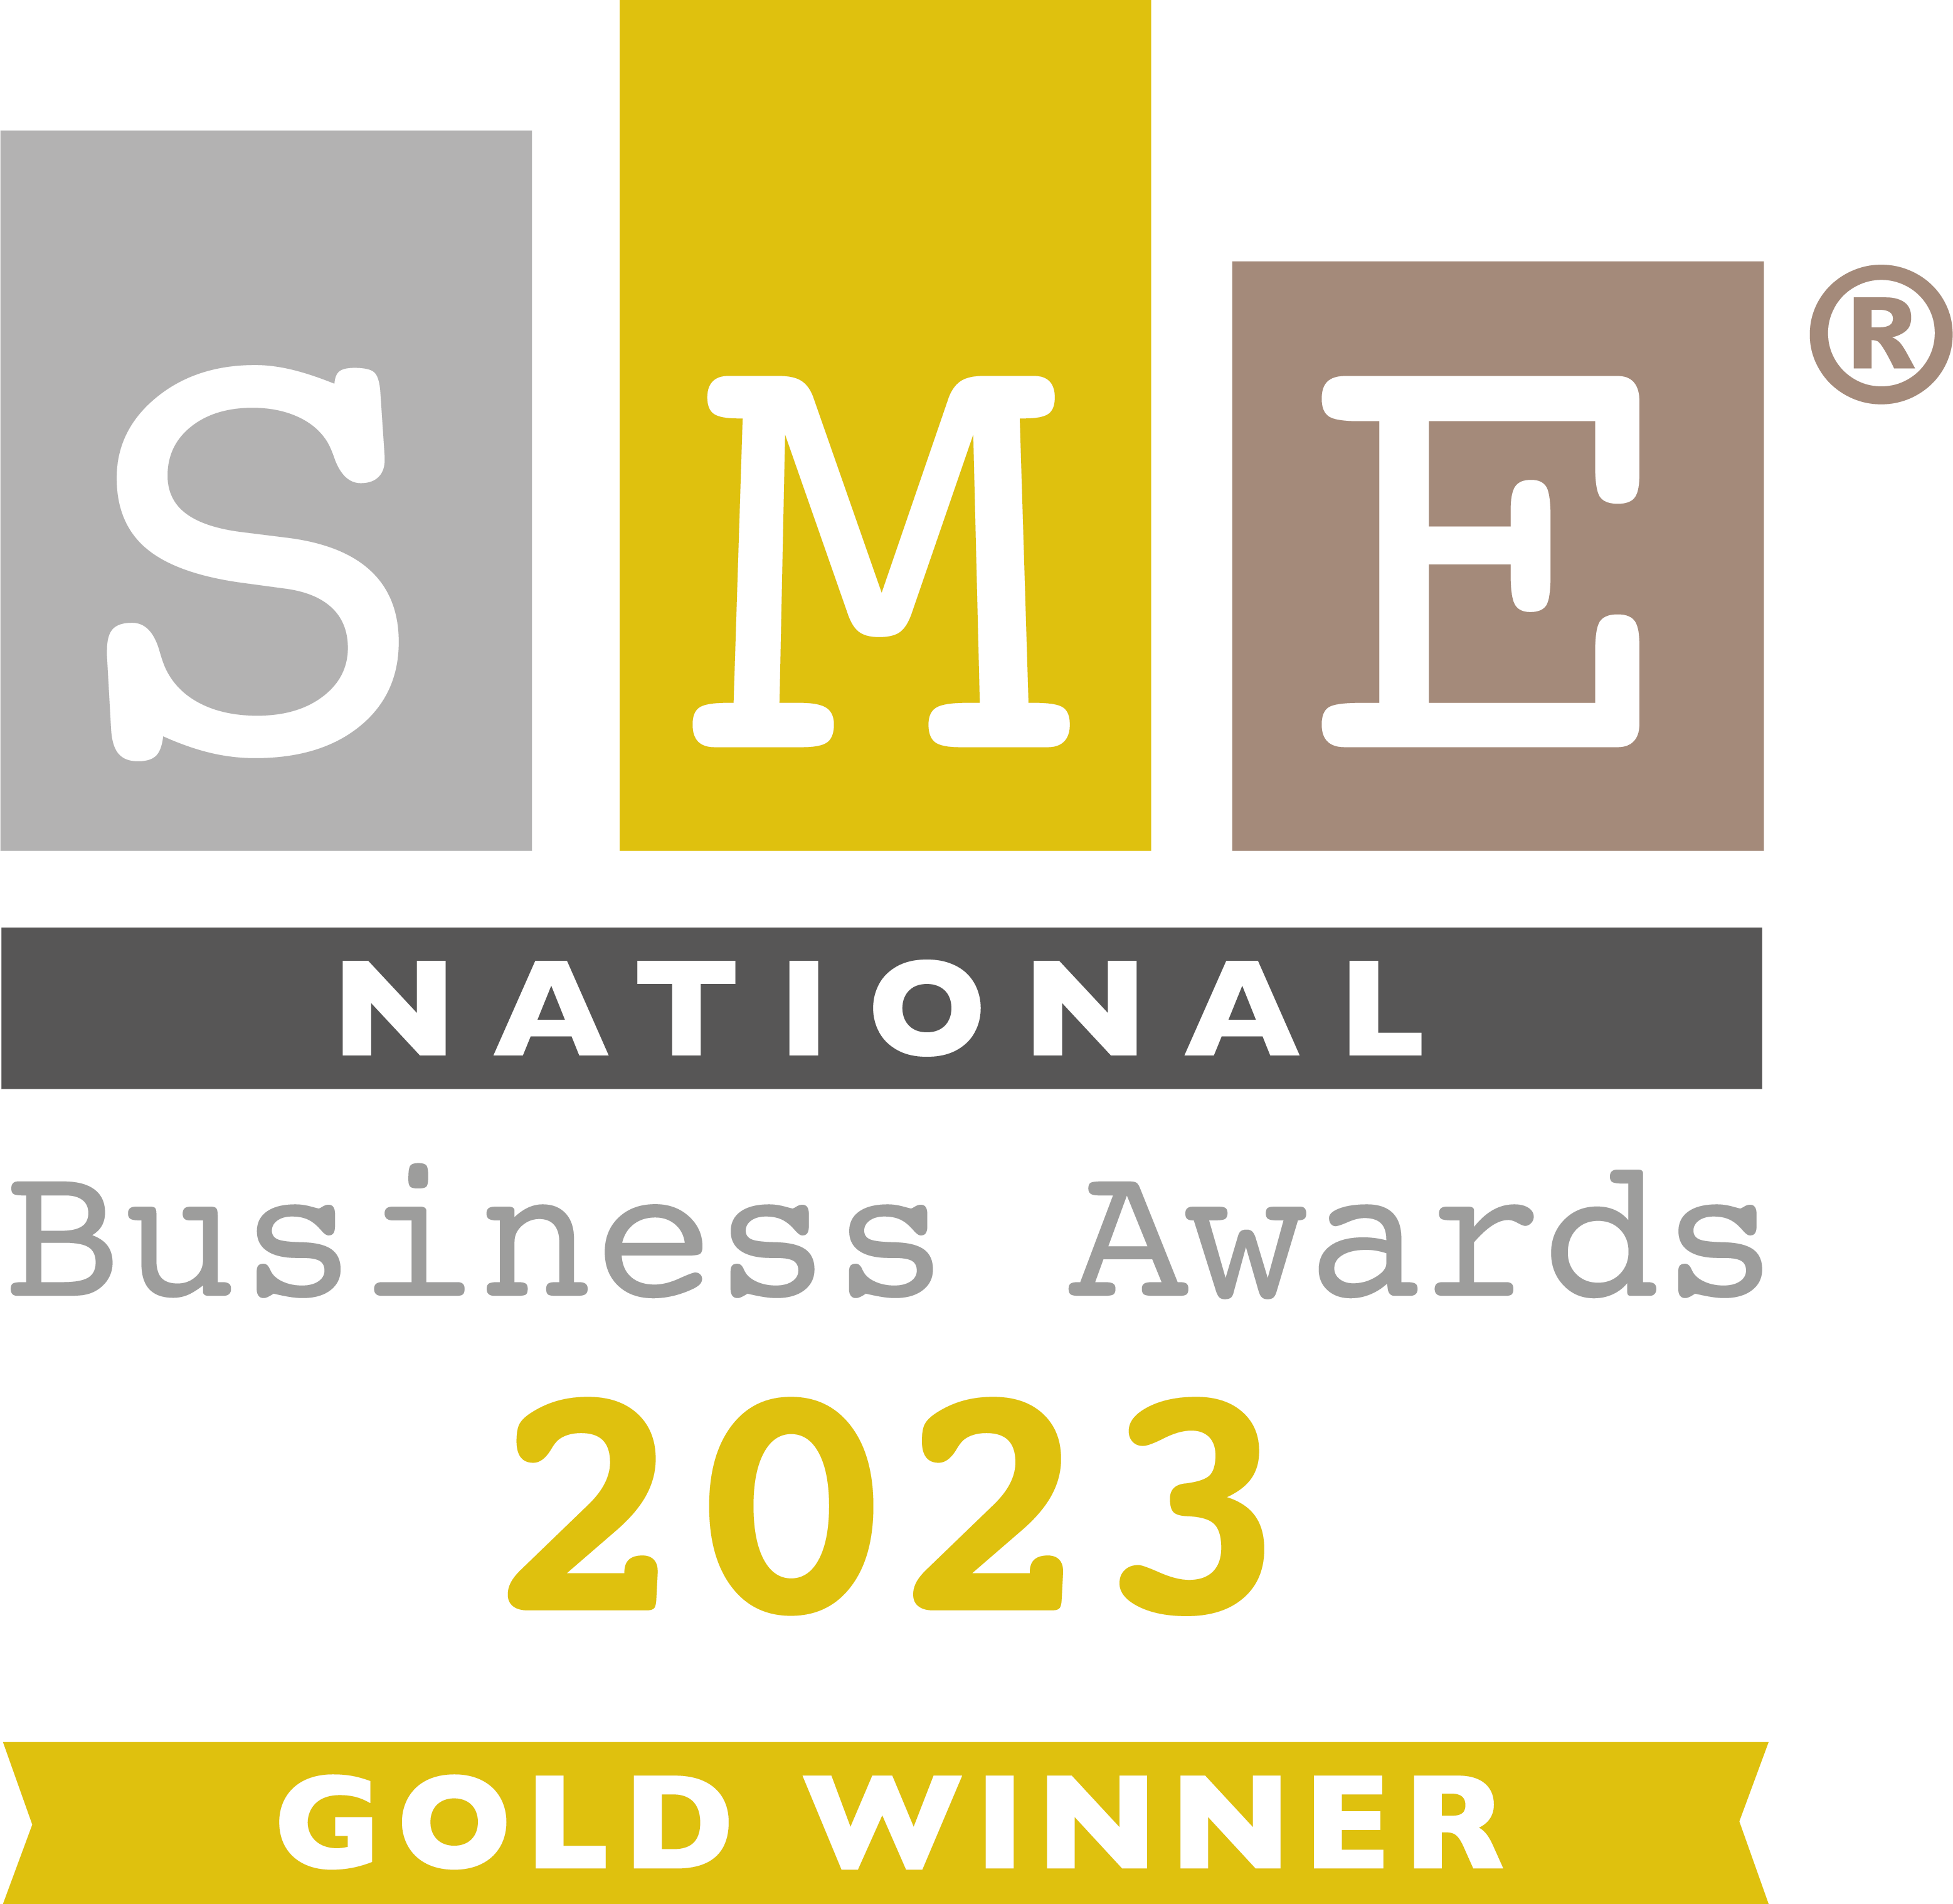 SME national business awards 2023 - gold winner for Business of the Year - Less than 50 Employees